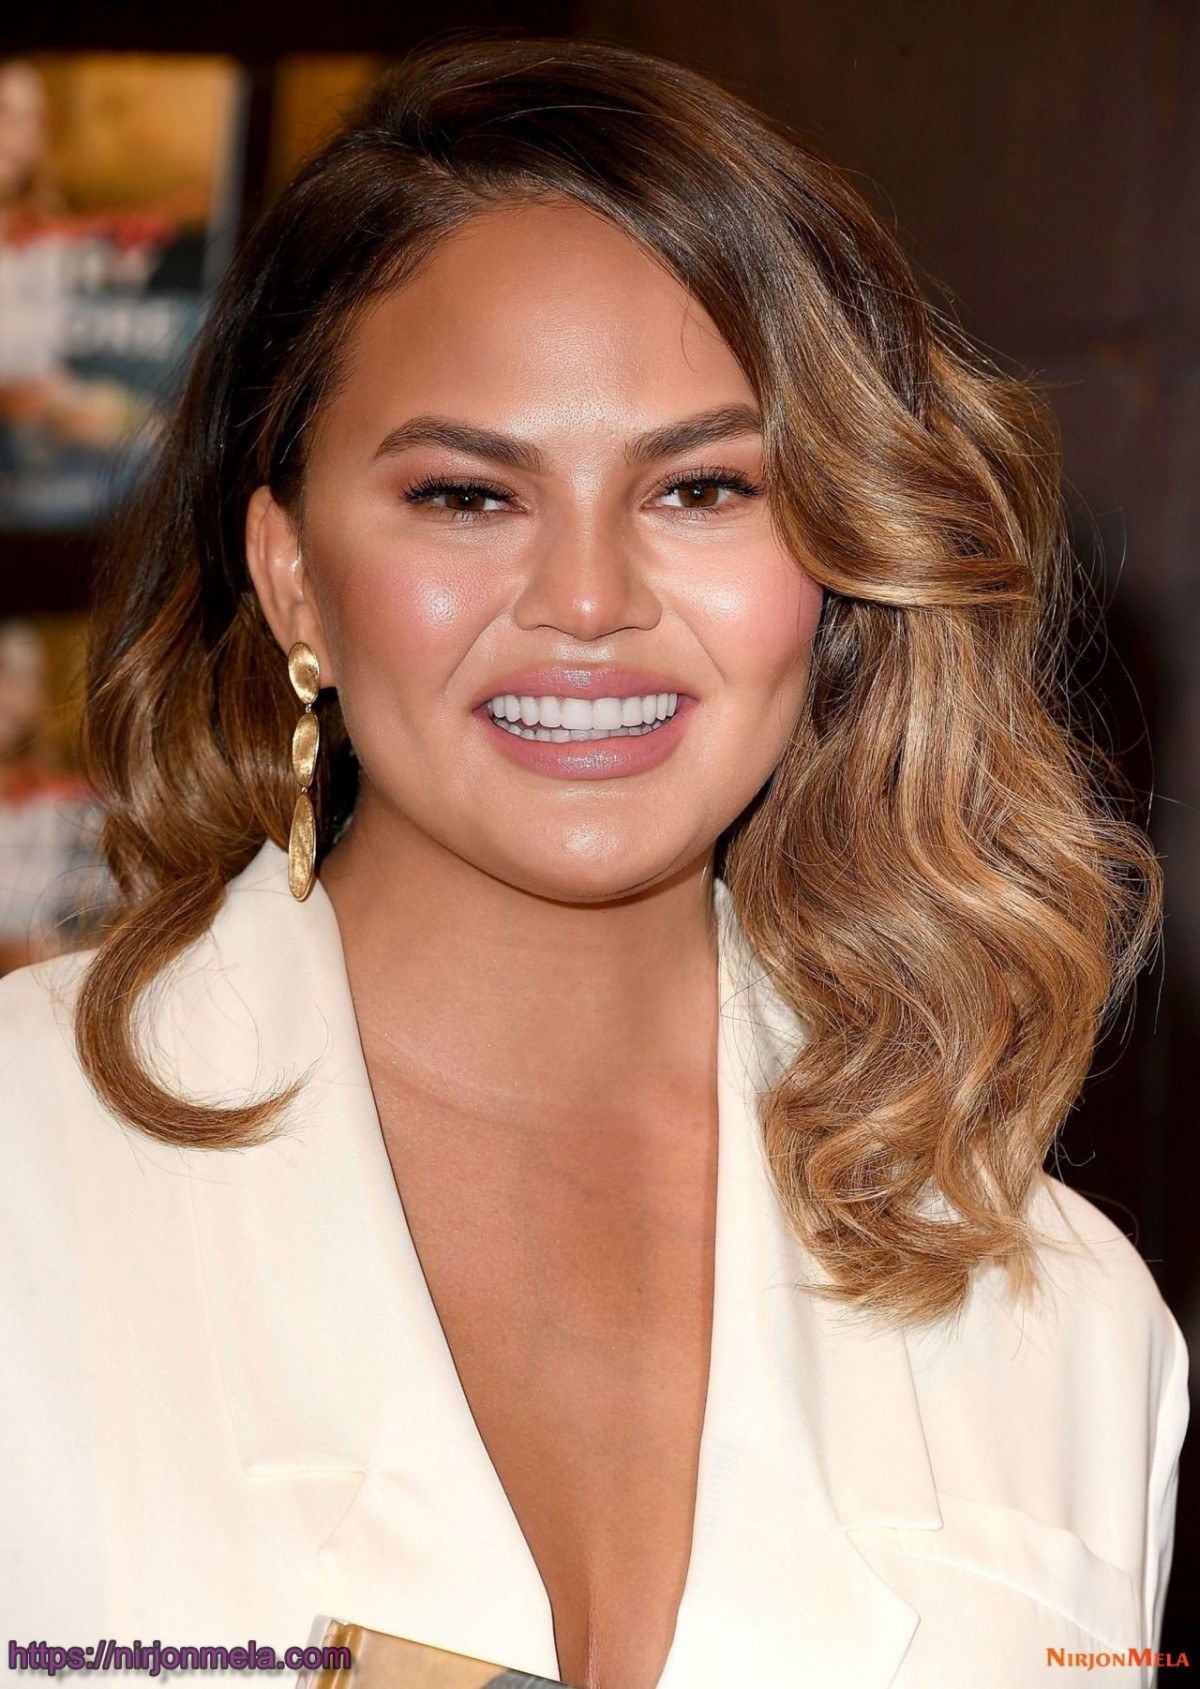 chrissy-teigen-signs-and-discusses-her-new-book-cravings-hungry-for-more-at-the-grove-in-la-0.jpg